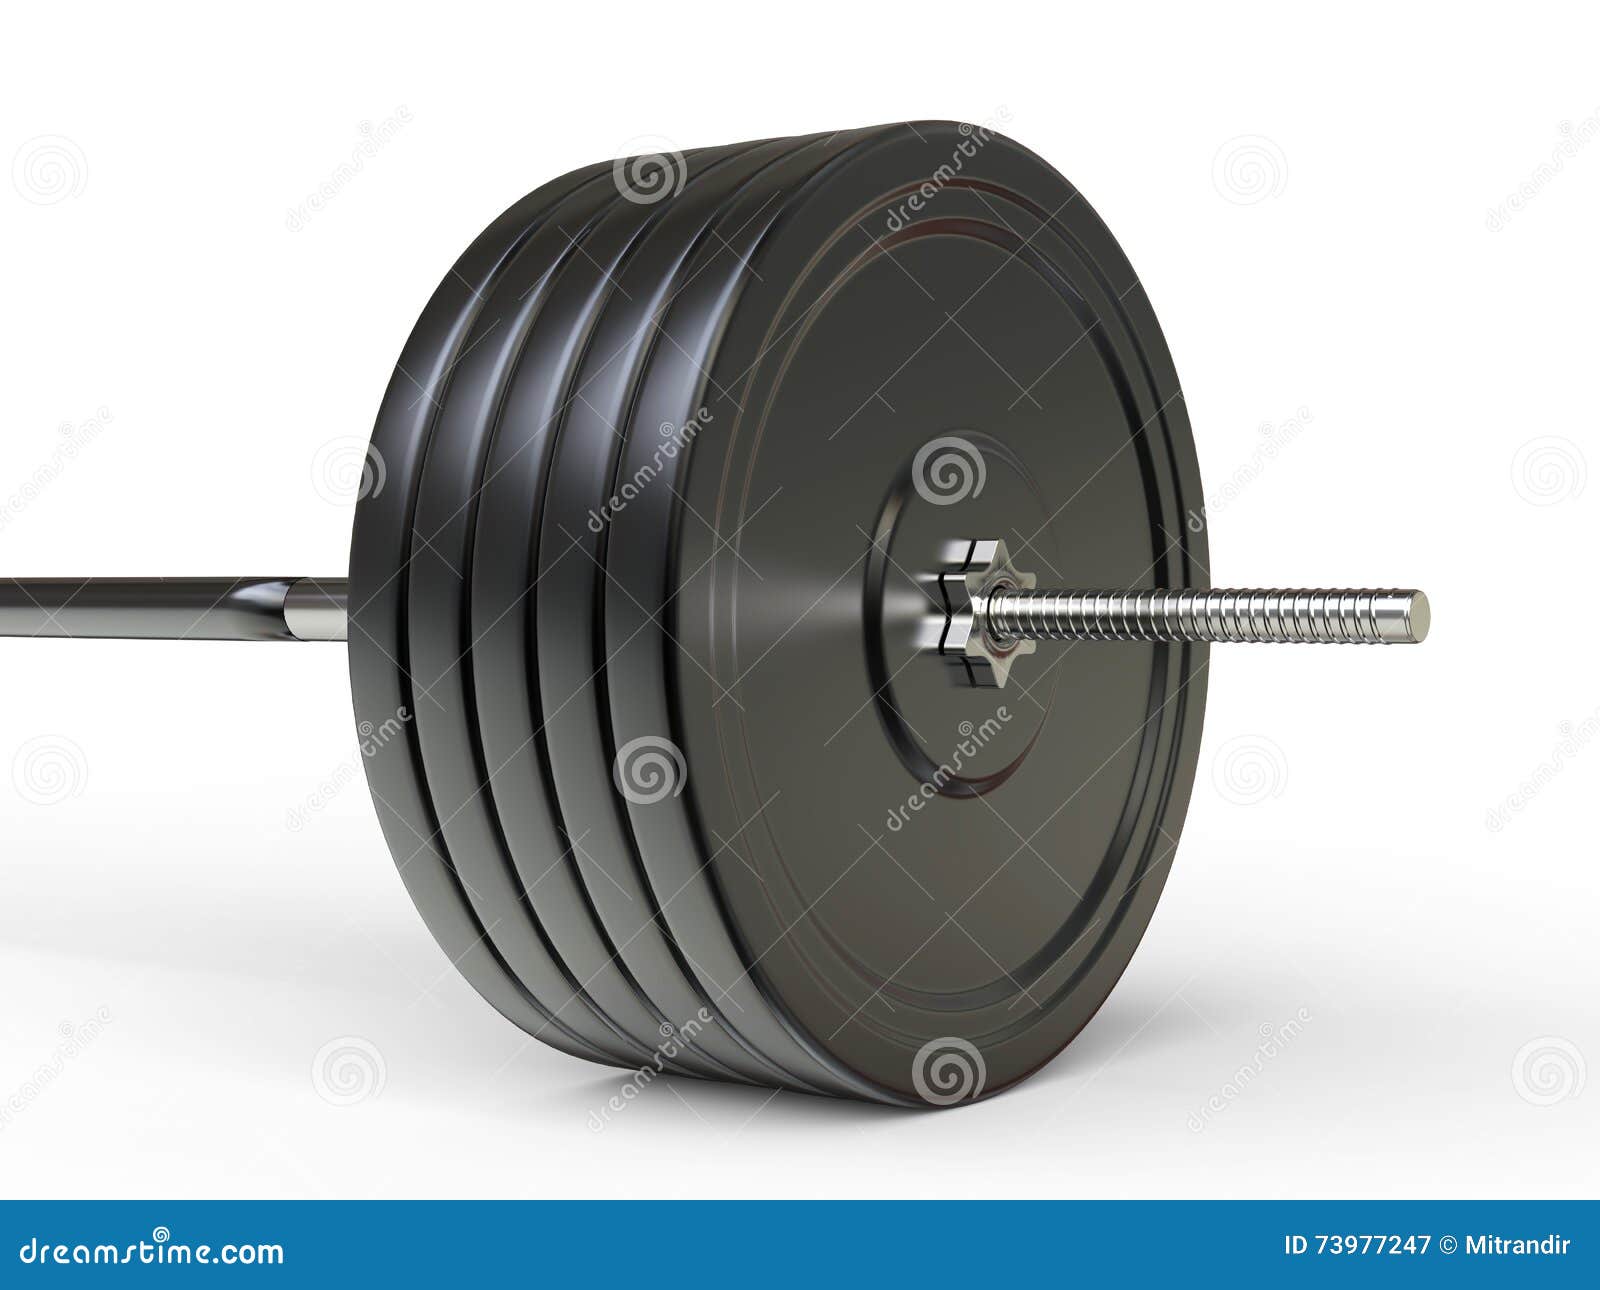 olympic barbell weight plates closeup shot